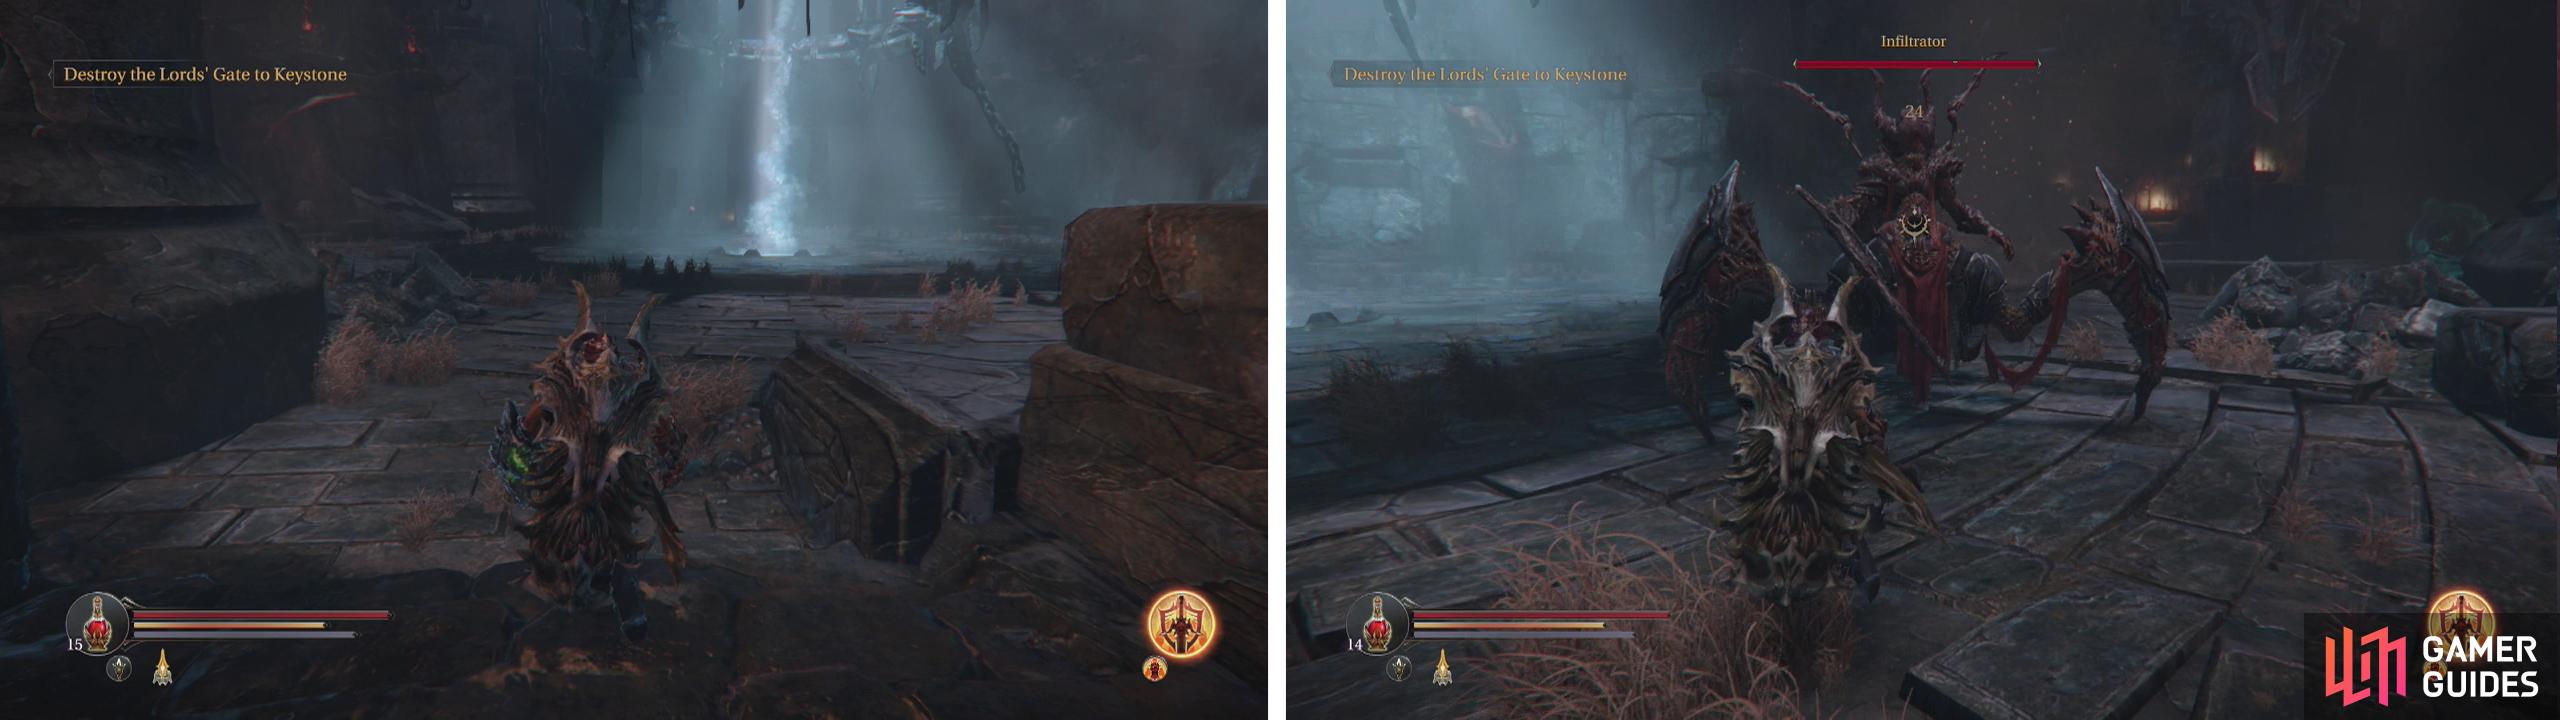 Approach the blue beam of light (left) to encounter the Infiltrator (right).